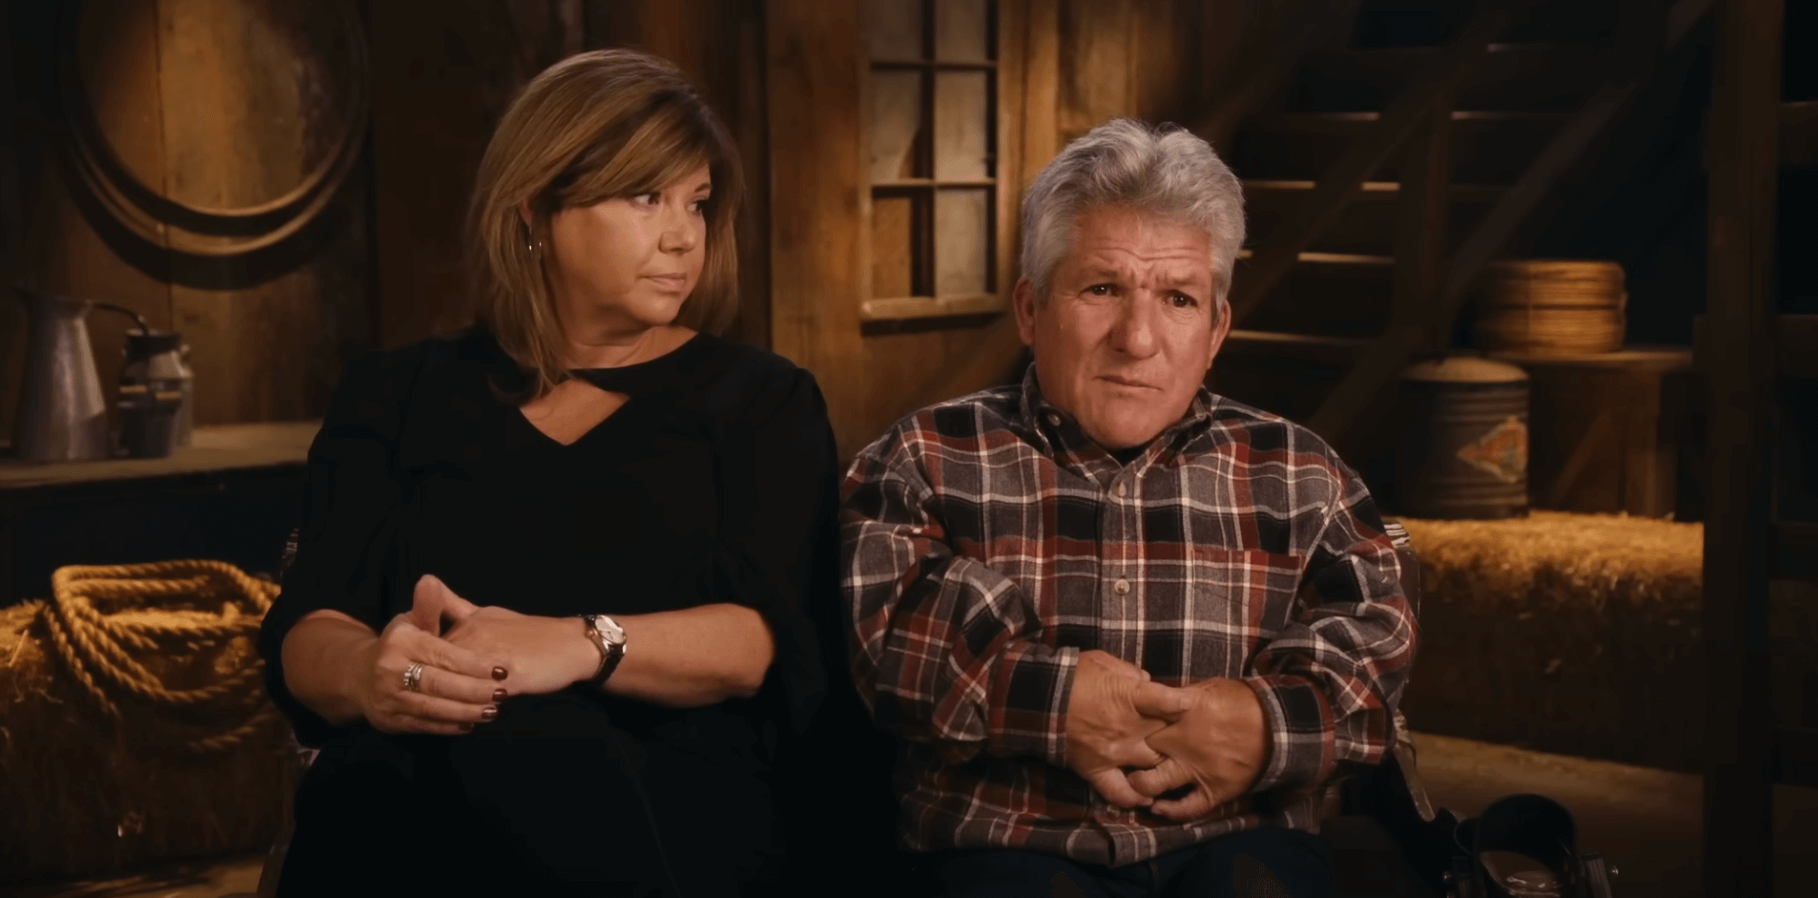 'Little People, Big World' stars Caryn Chandler and Matt Roloff sitting next to each other for an interview